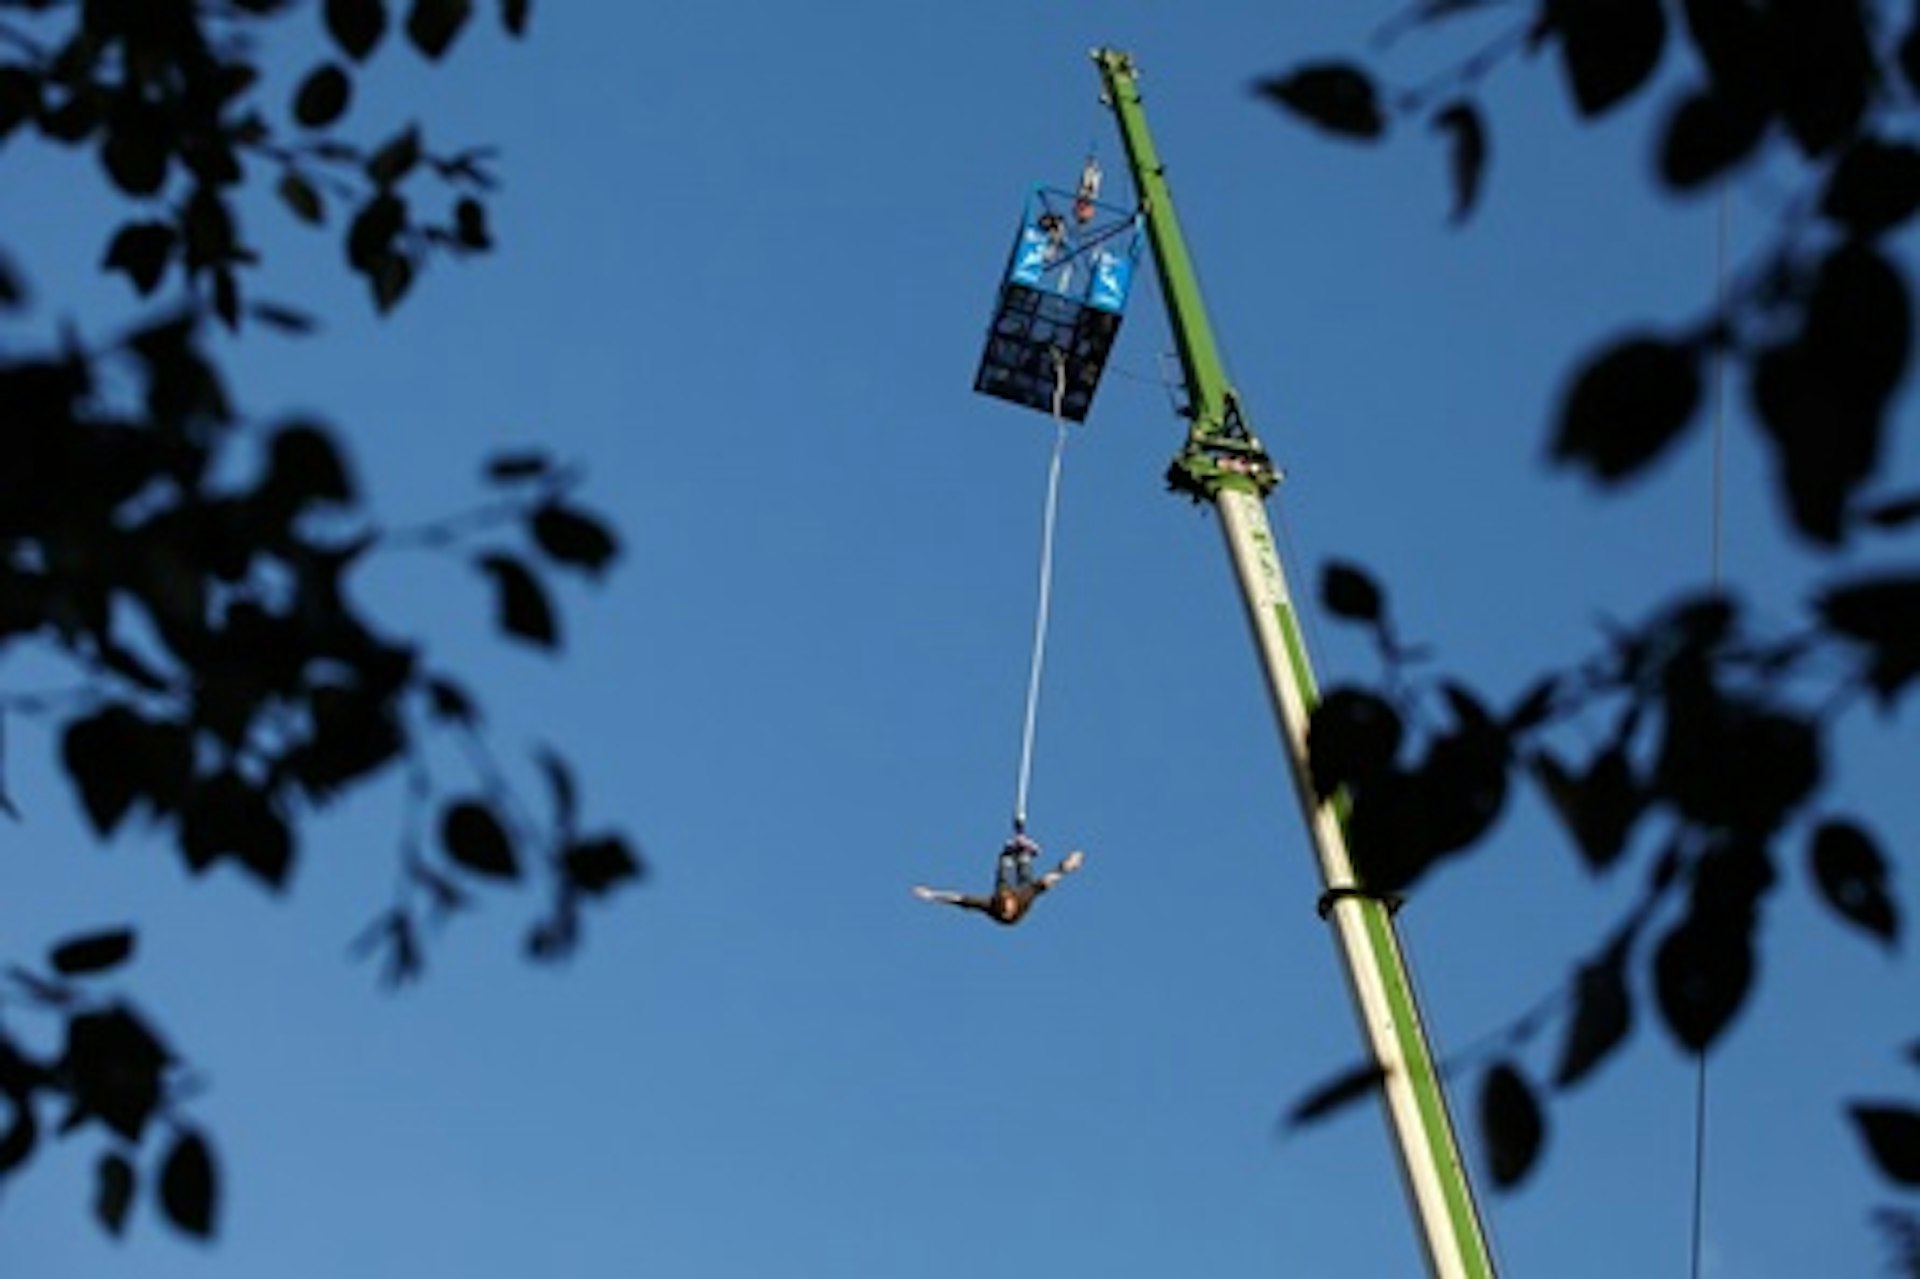 London Bungee Jump for One 2